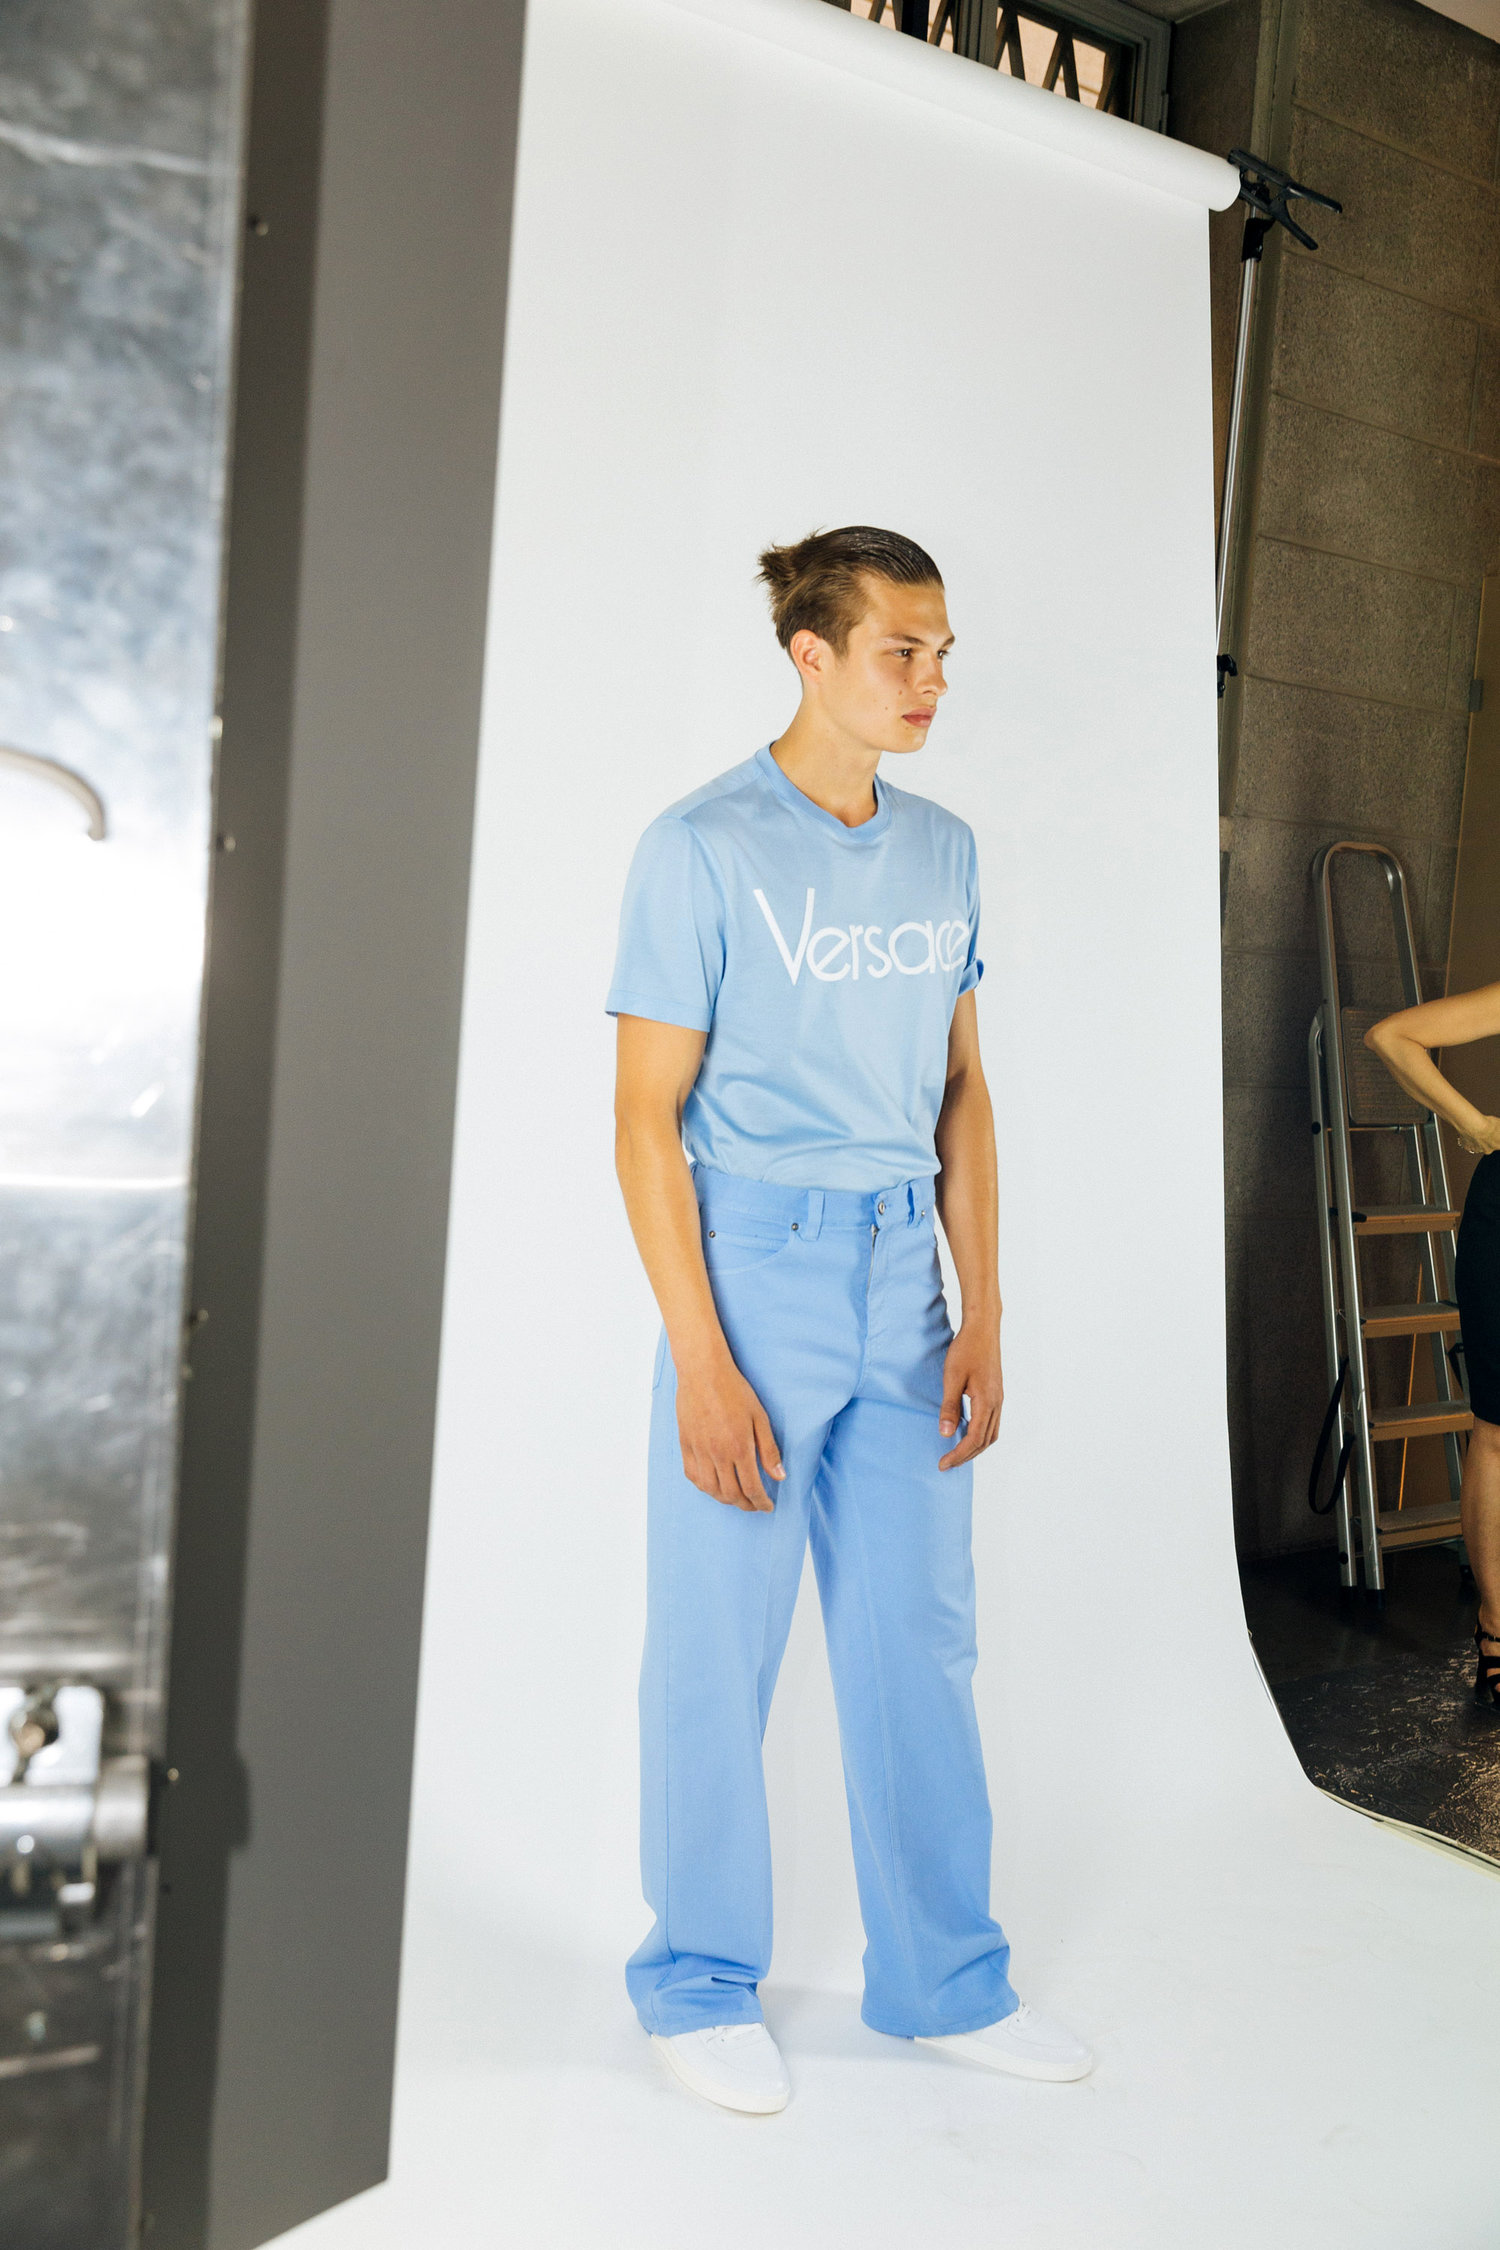 Louis Vuitton Mens SS20 Backstage by Melodie Jeng — Melodie Jeng